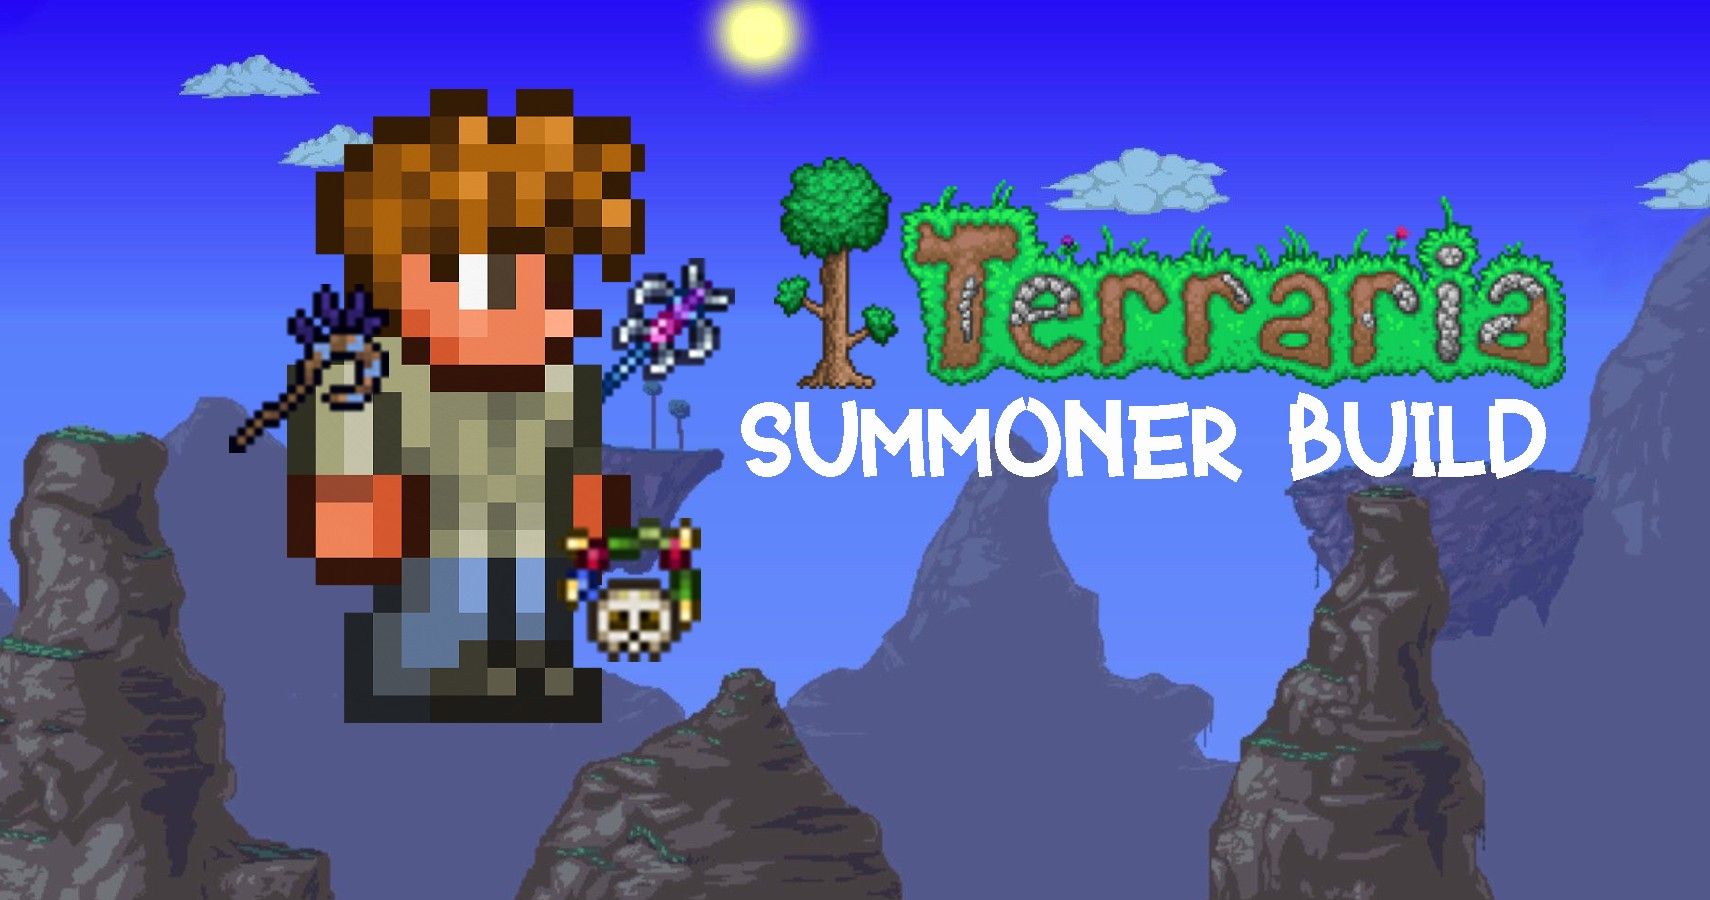 Weapons & Equip - My take on a Sentry Sub-class expansion | Terraria  Community Forums